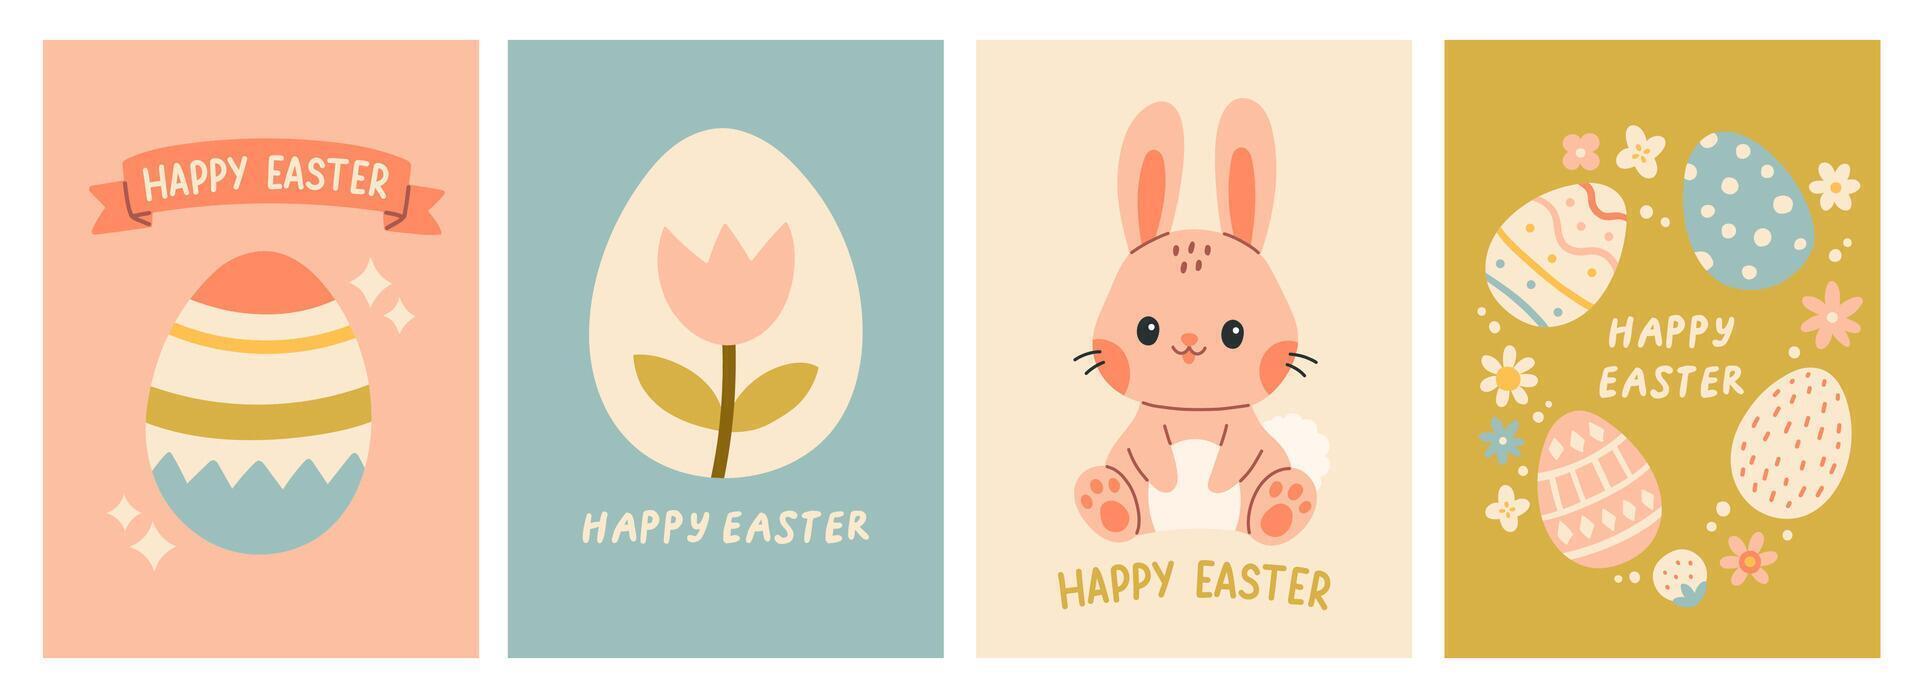 Cute Easter cards set. Spring and Easter collection of cute animals, flowers and decorations. Perfect for poster, card, scrapbooking , tag, invitation, sticker kit. Hand drawn vector illustration.